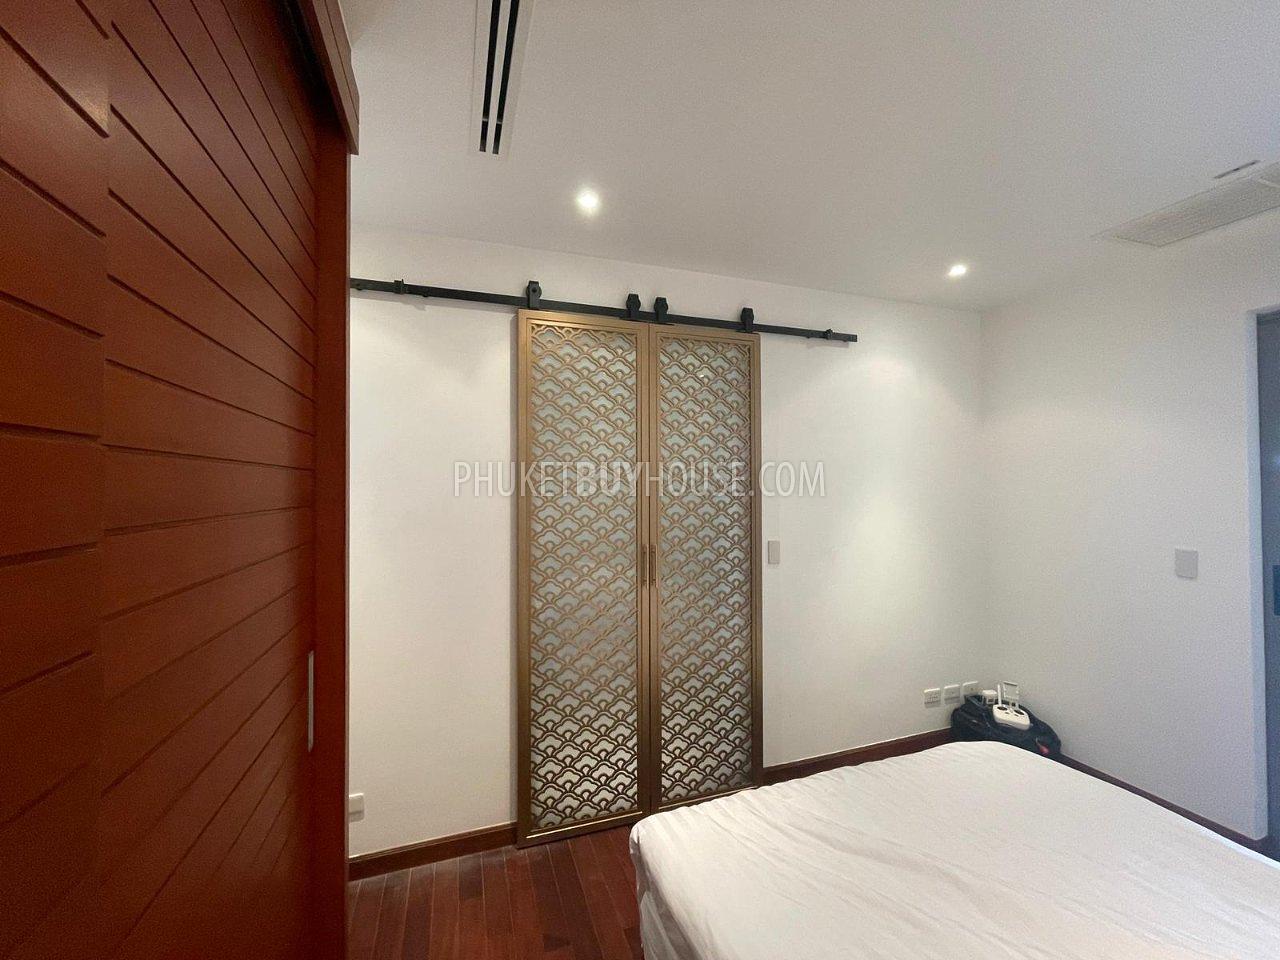 BAN6988: Lovely 1 bedroom House for Sale in Bang Tao area. Photo #9